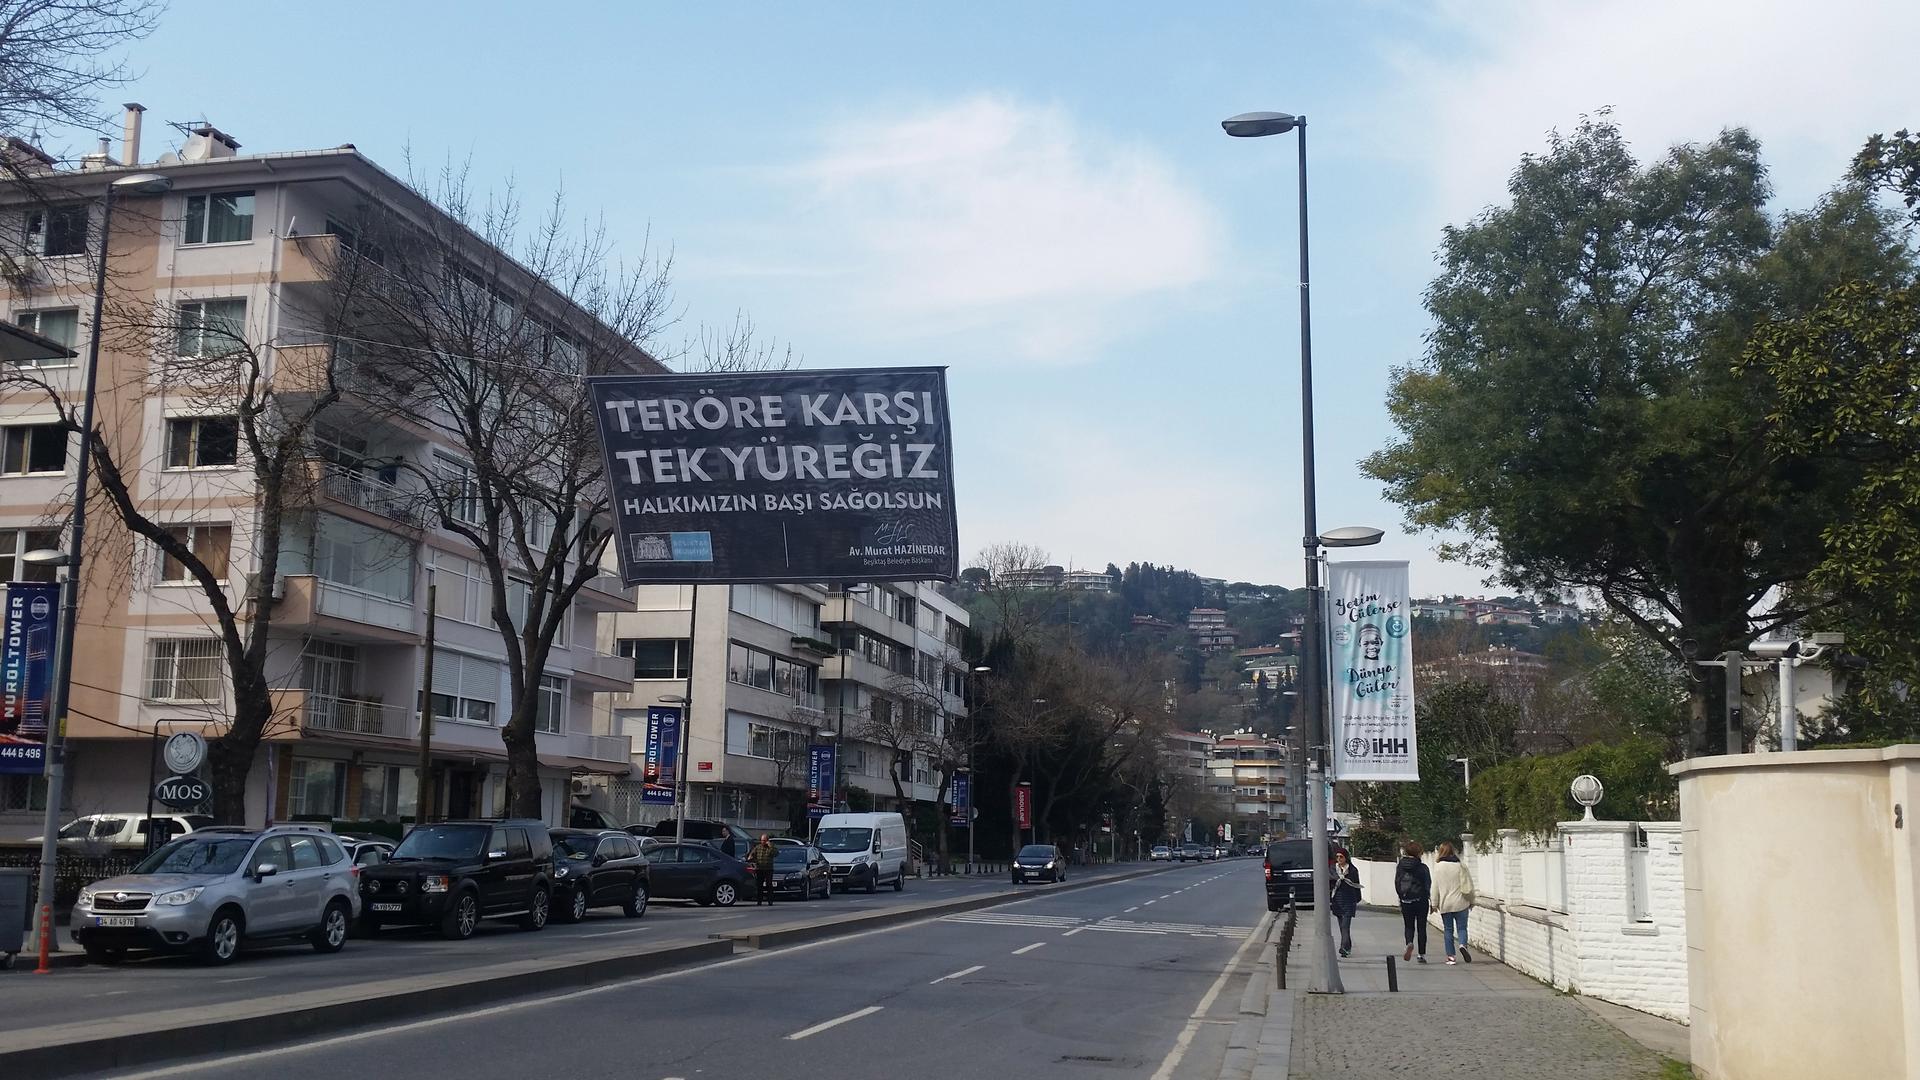 Banners are hanging all over Istanbul with different messages of unity and anti-terrorism. This one says, "We are one against terror."